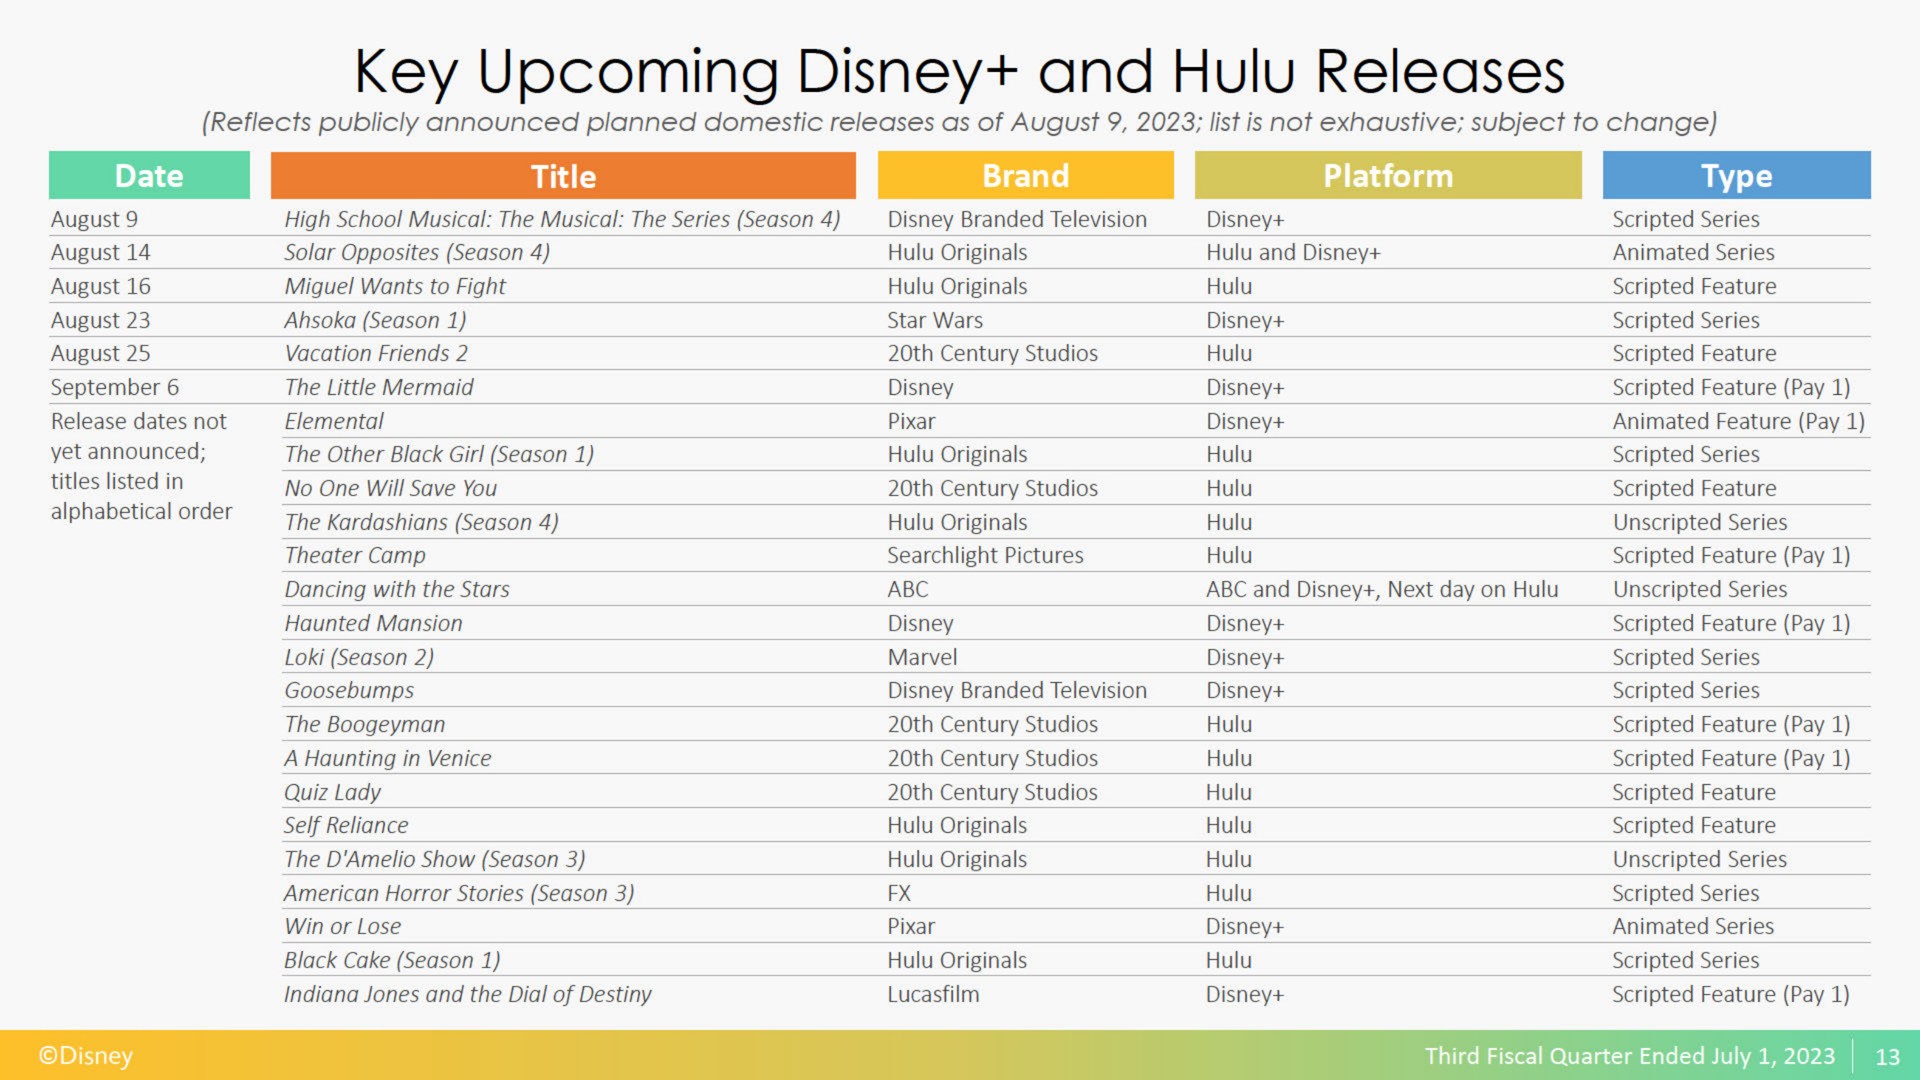 key upcoming and hulu releases | Disney